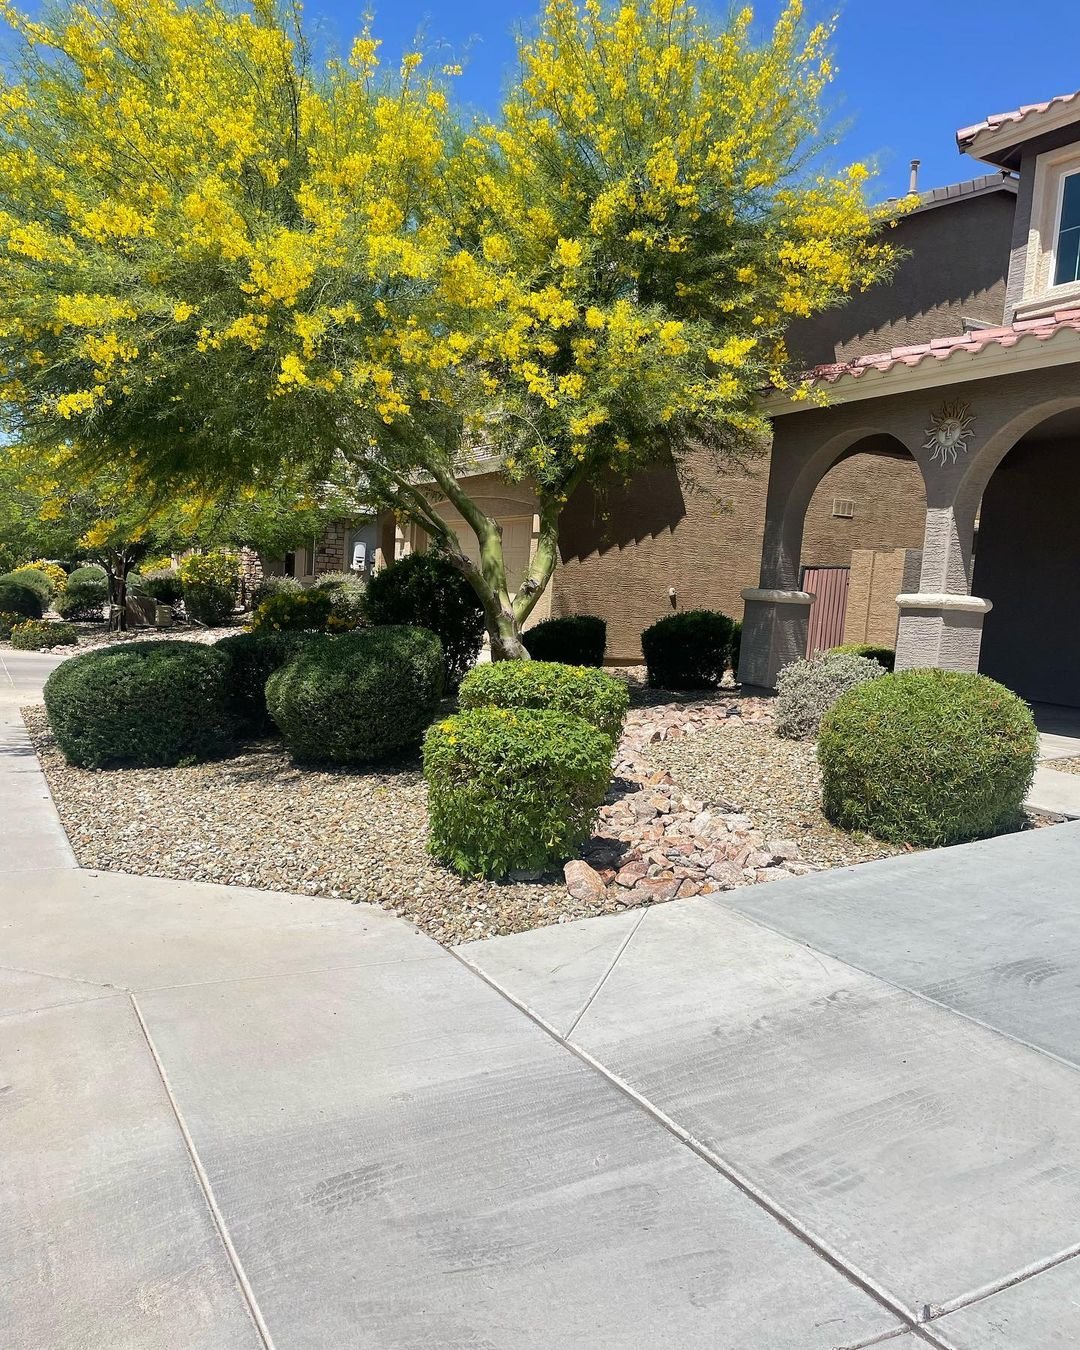 Before and After Front Yard Tree Trimming Services, Valley Of The Sun Landscaping2.jpg